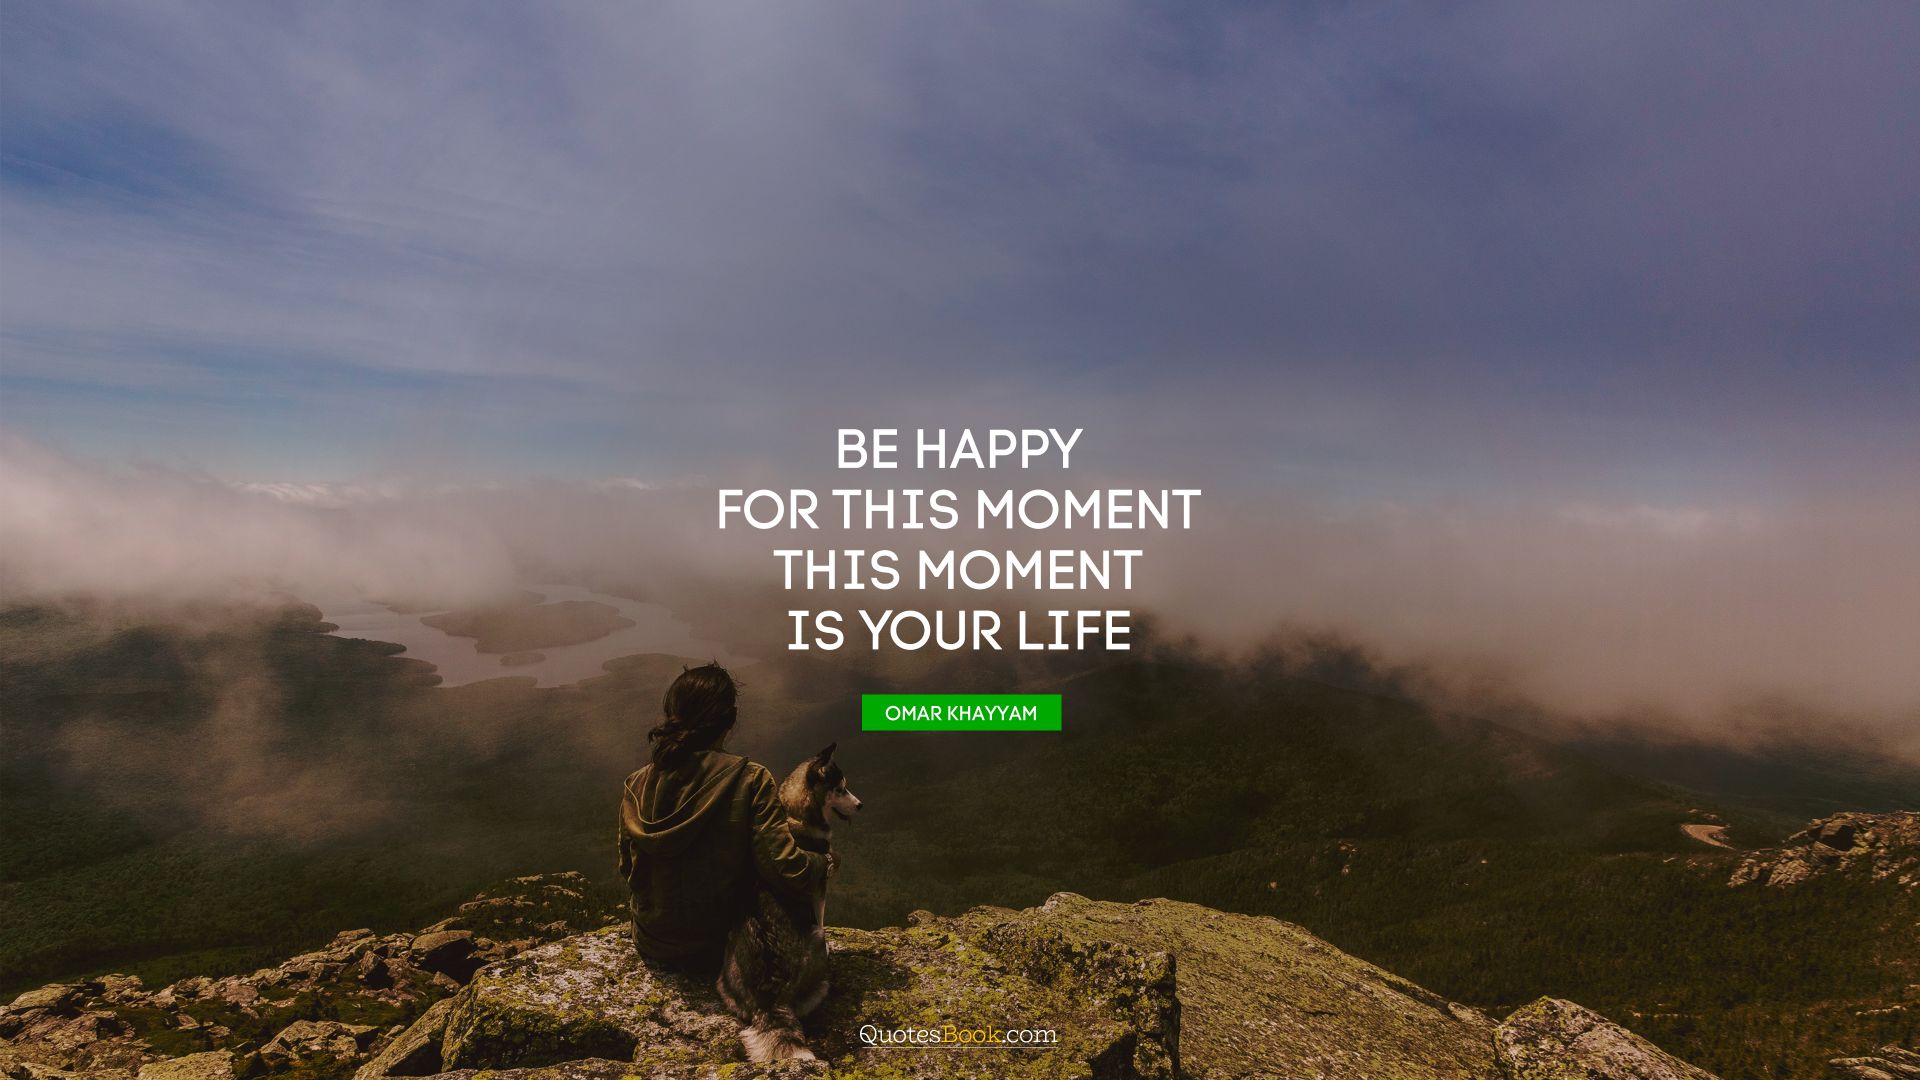 Be happy for this moment. This moment is your life. - Quote by Omar Khayyam